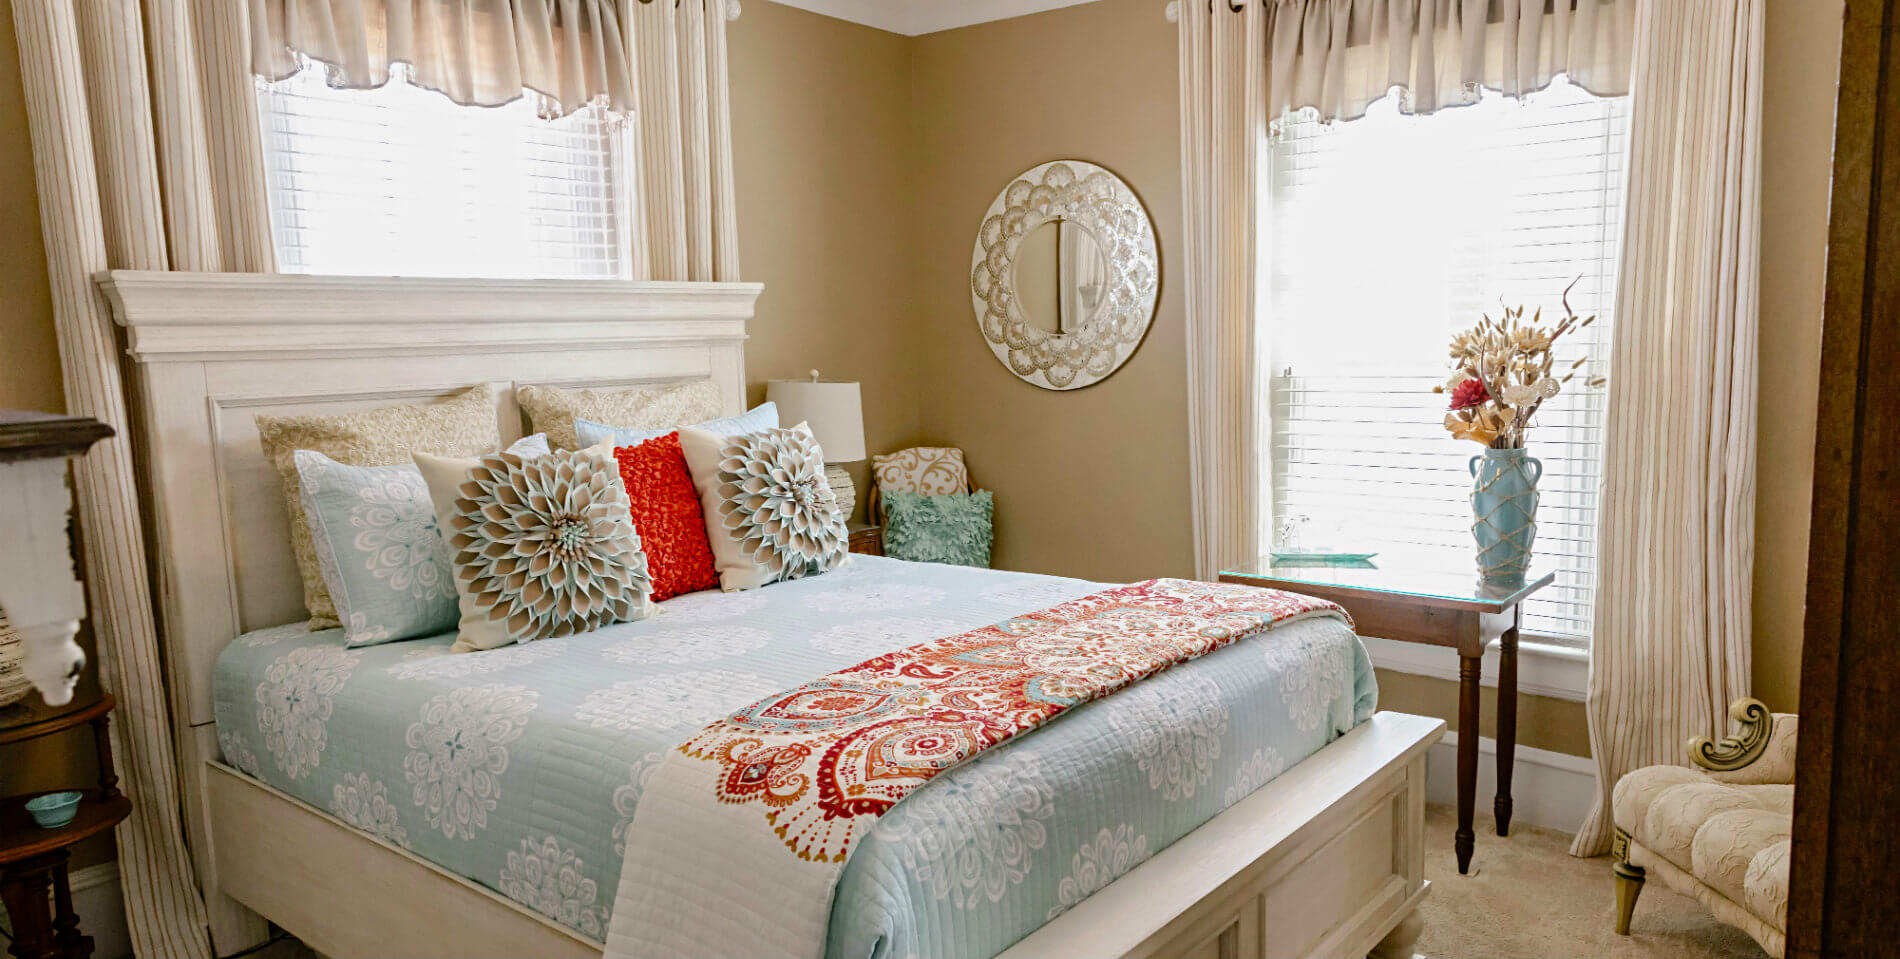 A bed on a white-washed wooden bedframe with many decorative throw pillows and beige walls. 